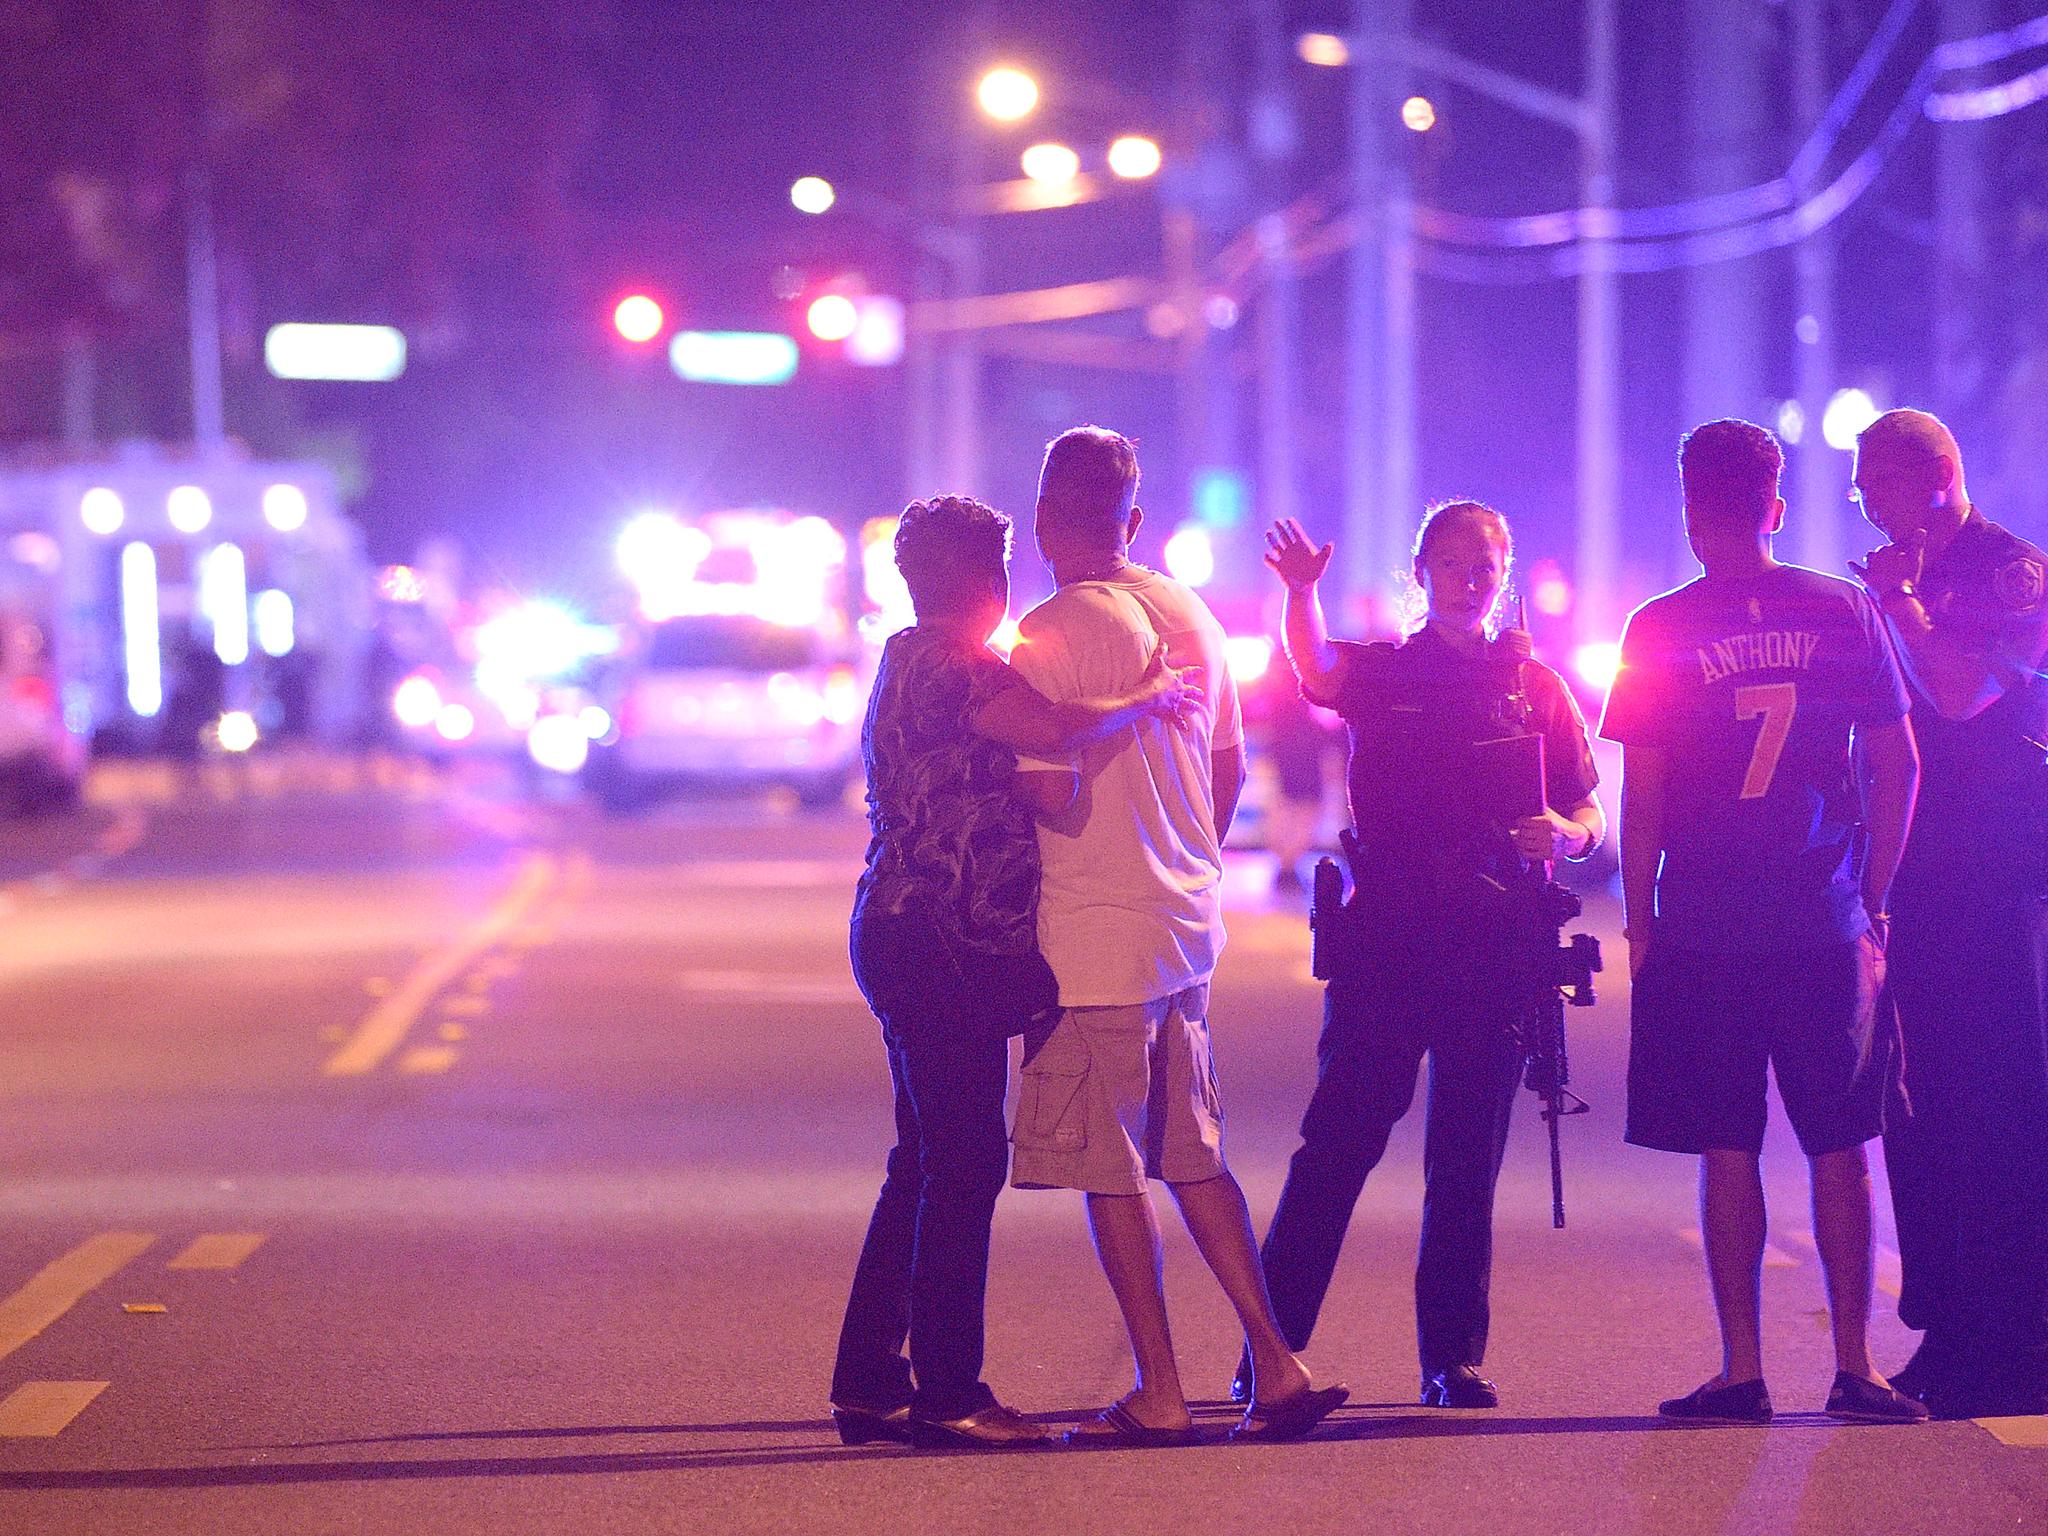 Orlando Police officers direct family members away from a multiple shooting at a nightclub